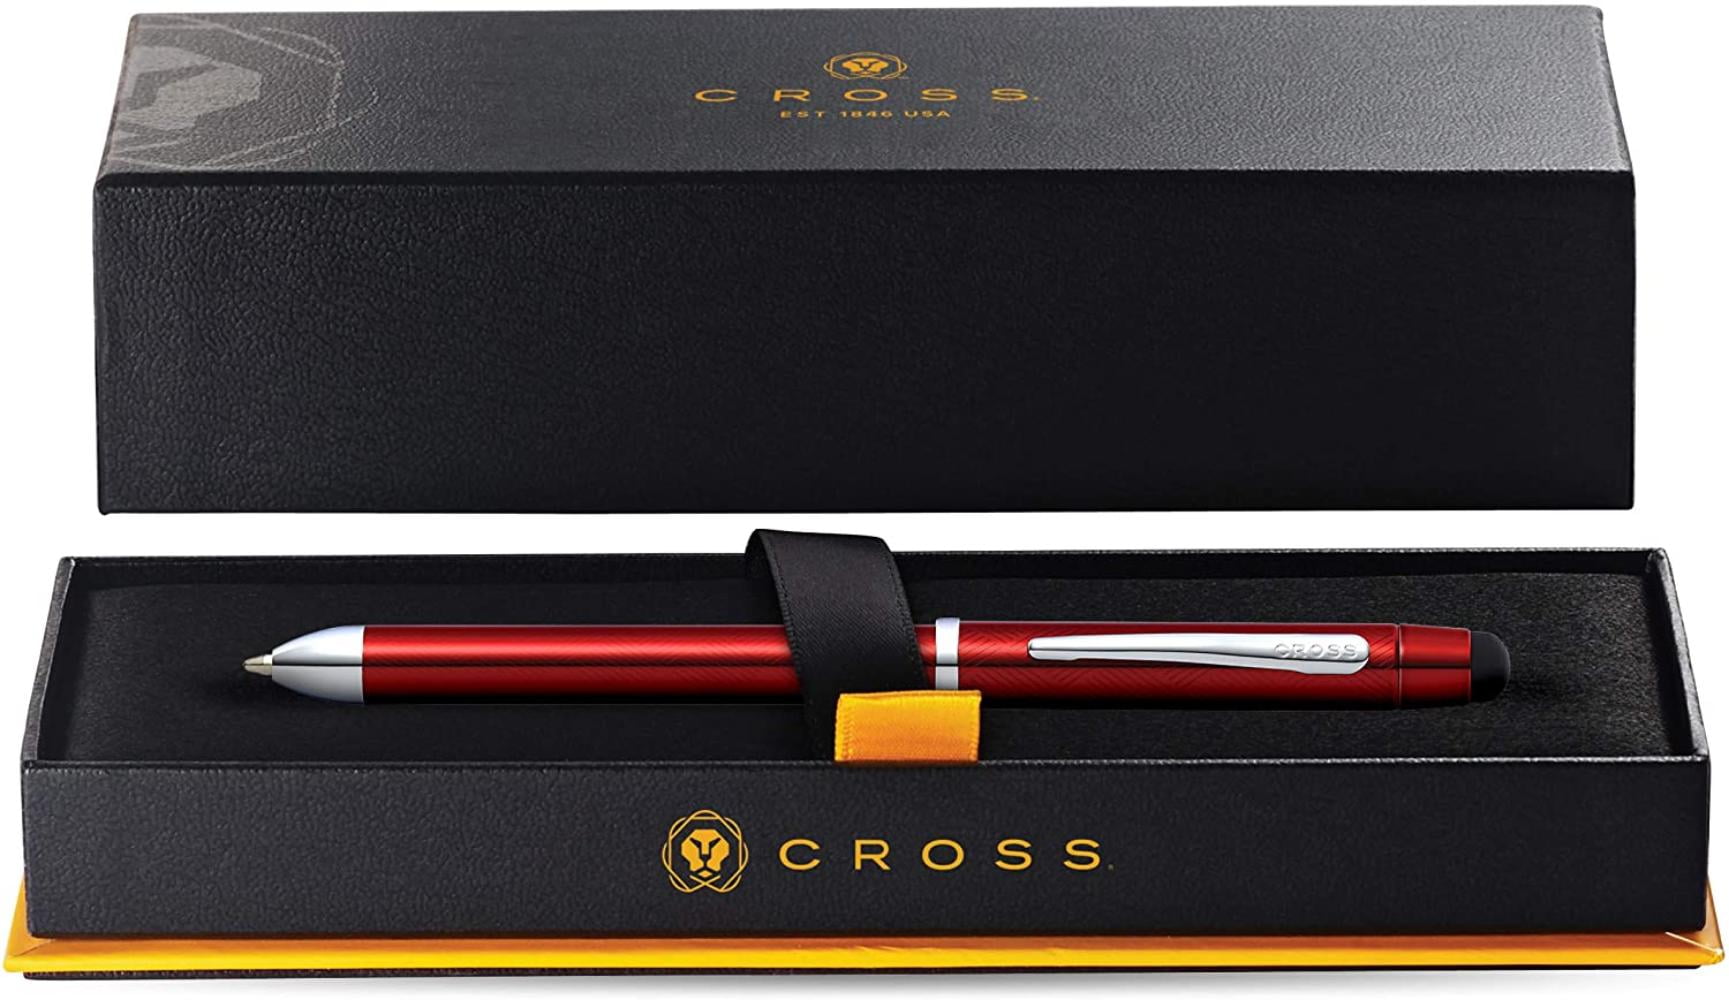 Cross Tech3 PVD Multifunction Pen with Stylus and 0.5mm Lead 